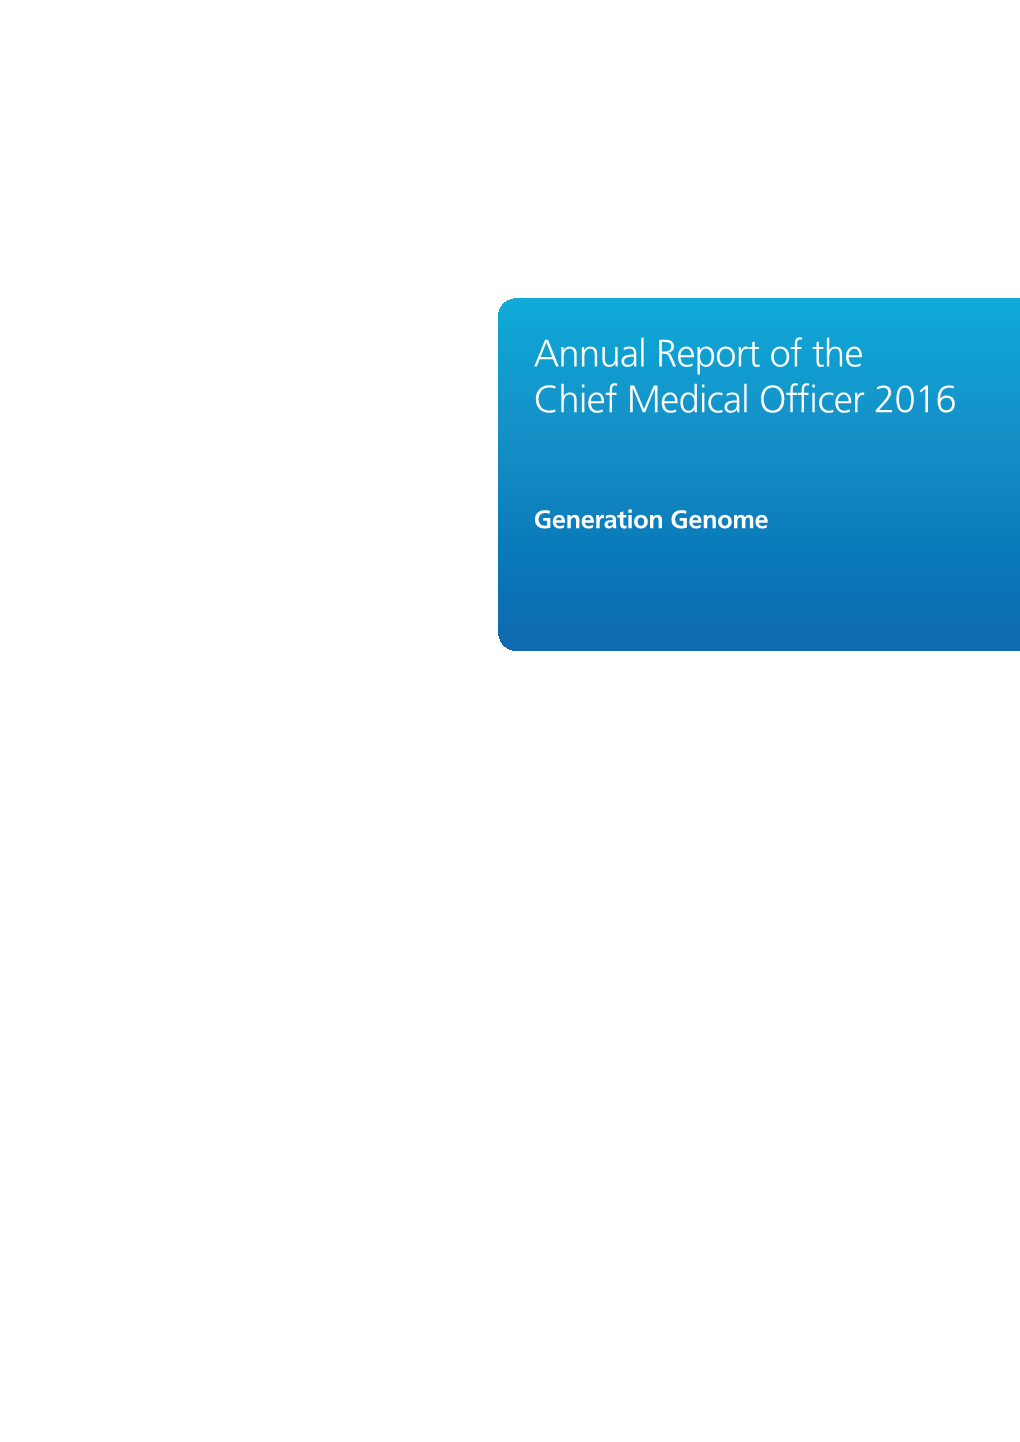 Annual Report of the Chief Medical Officer 2016